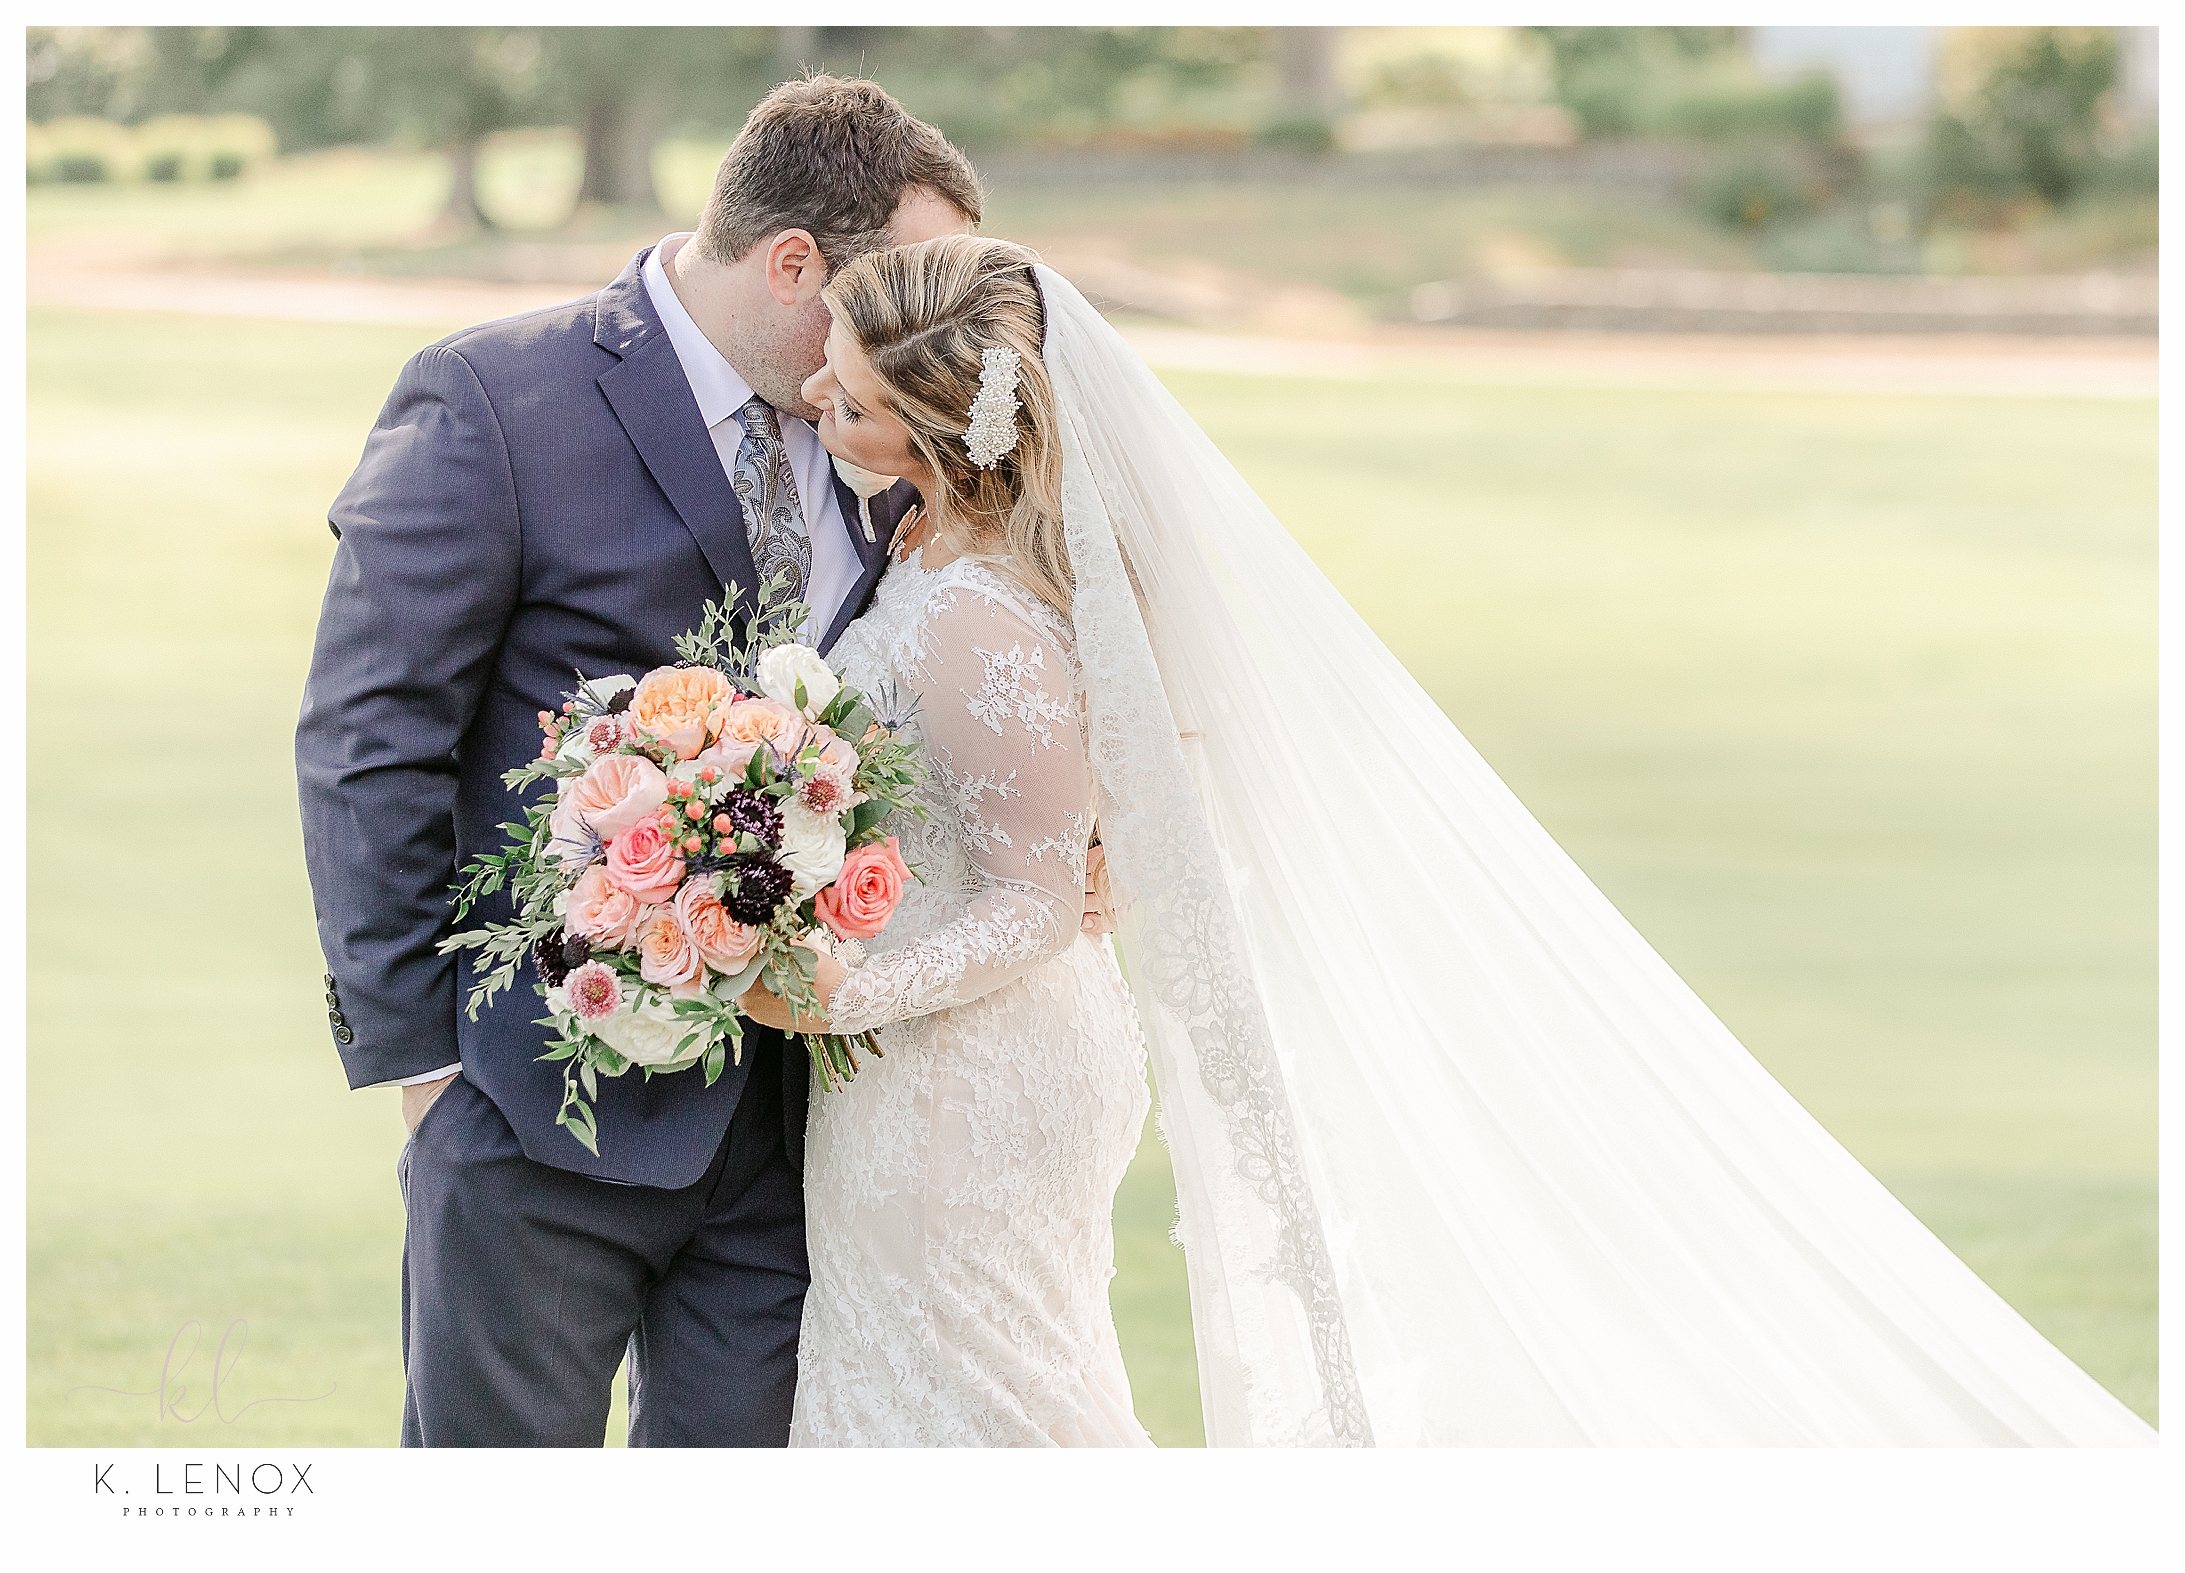 Light and Airy photos of a bride and groom at the Wentworth Country Club for their wedding. 